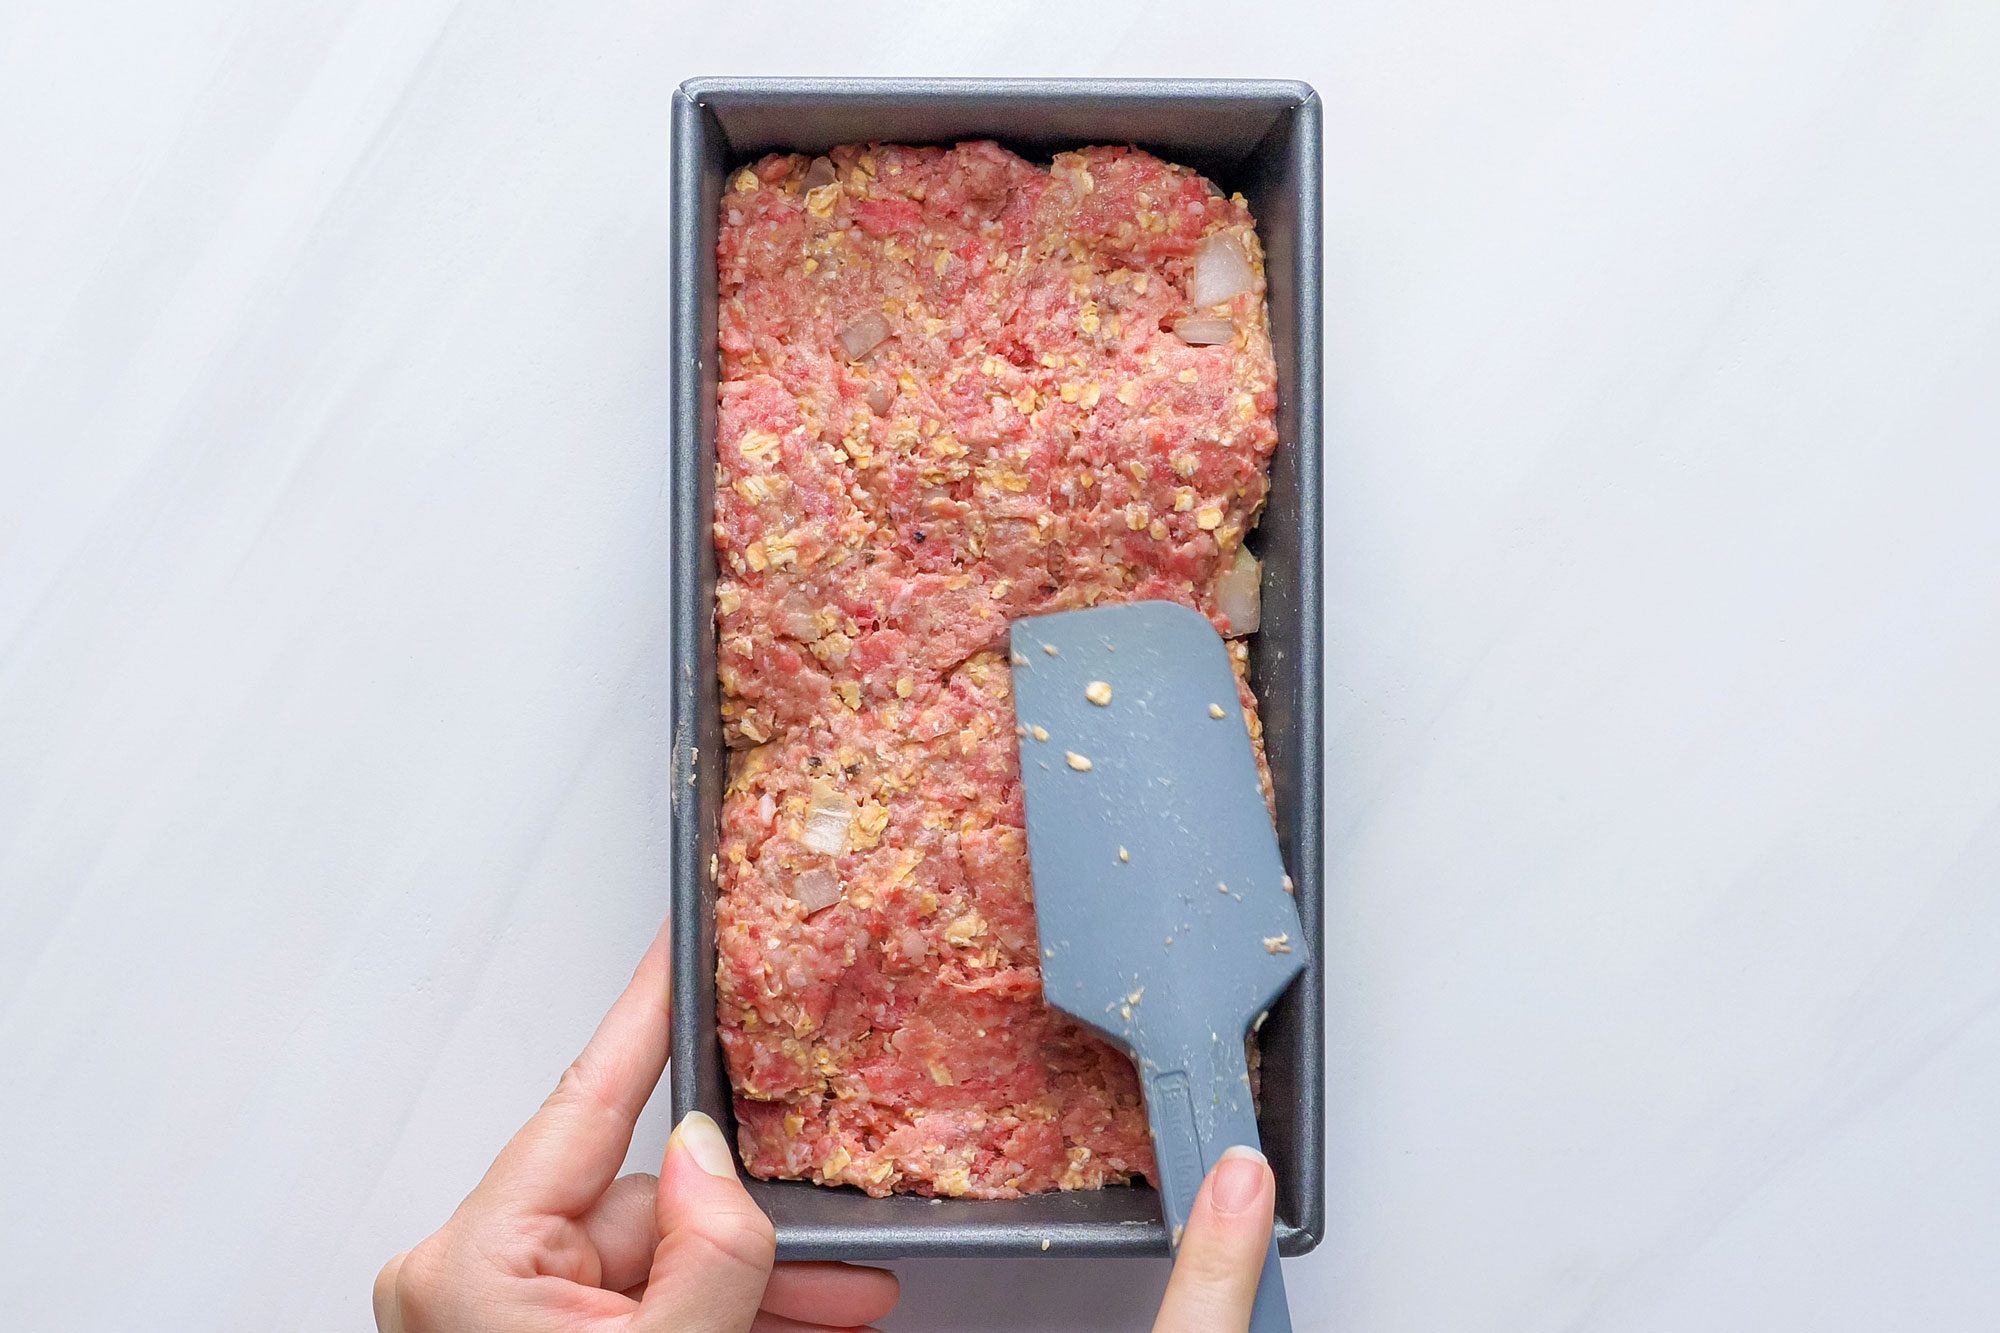 Meat Loaf with Oatmeal Recipe: How to Make It